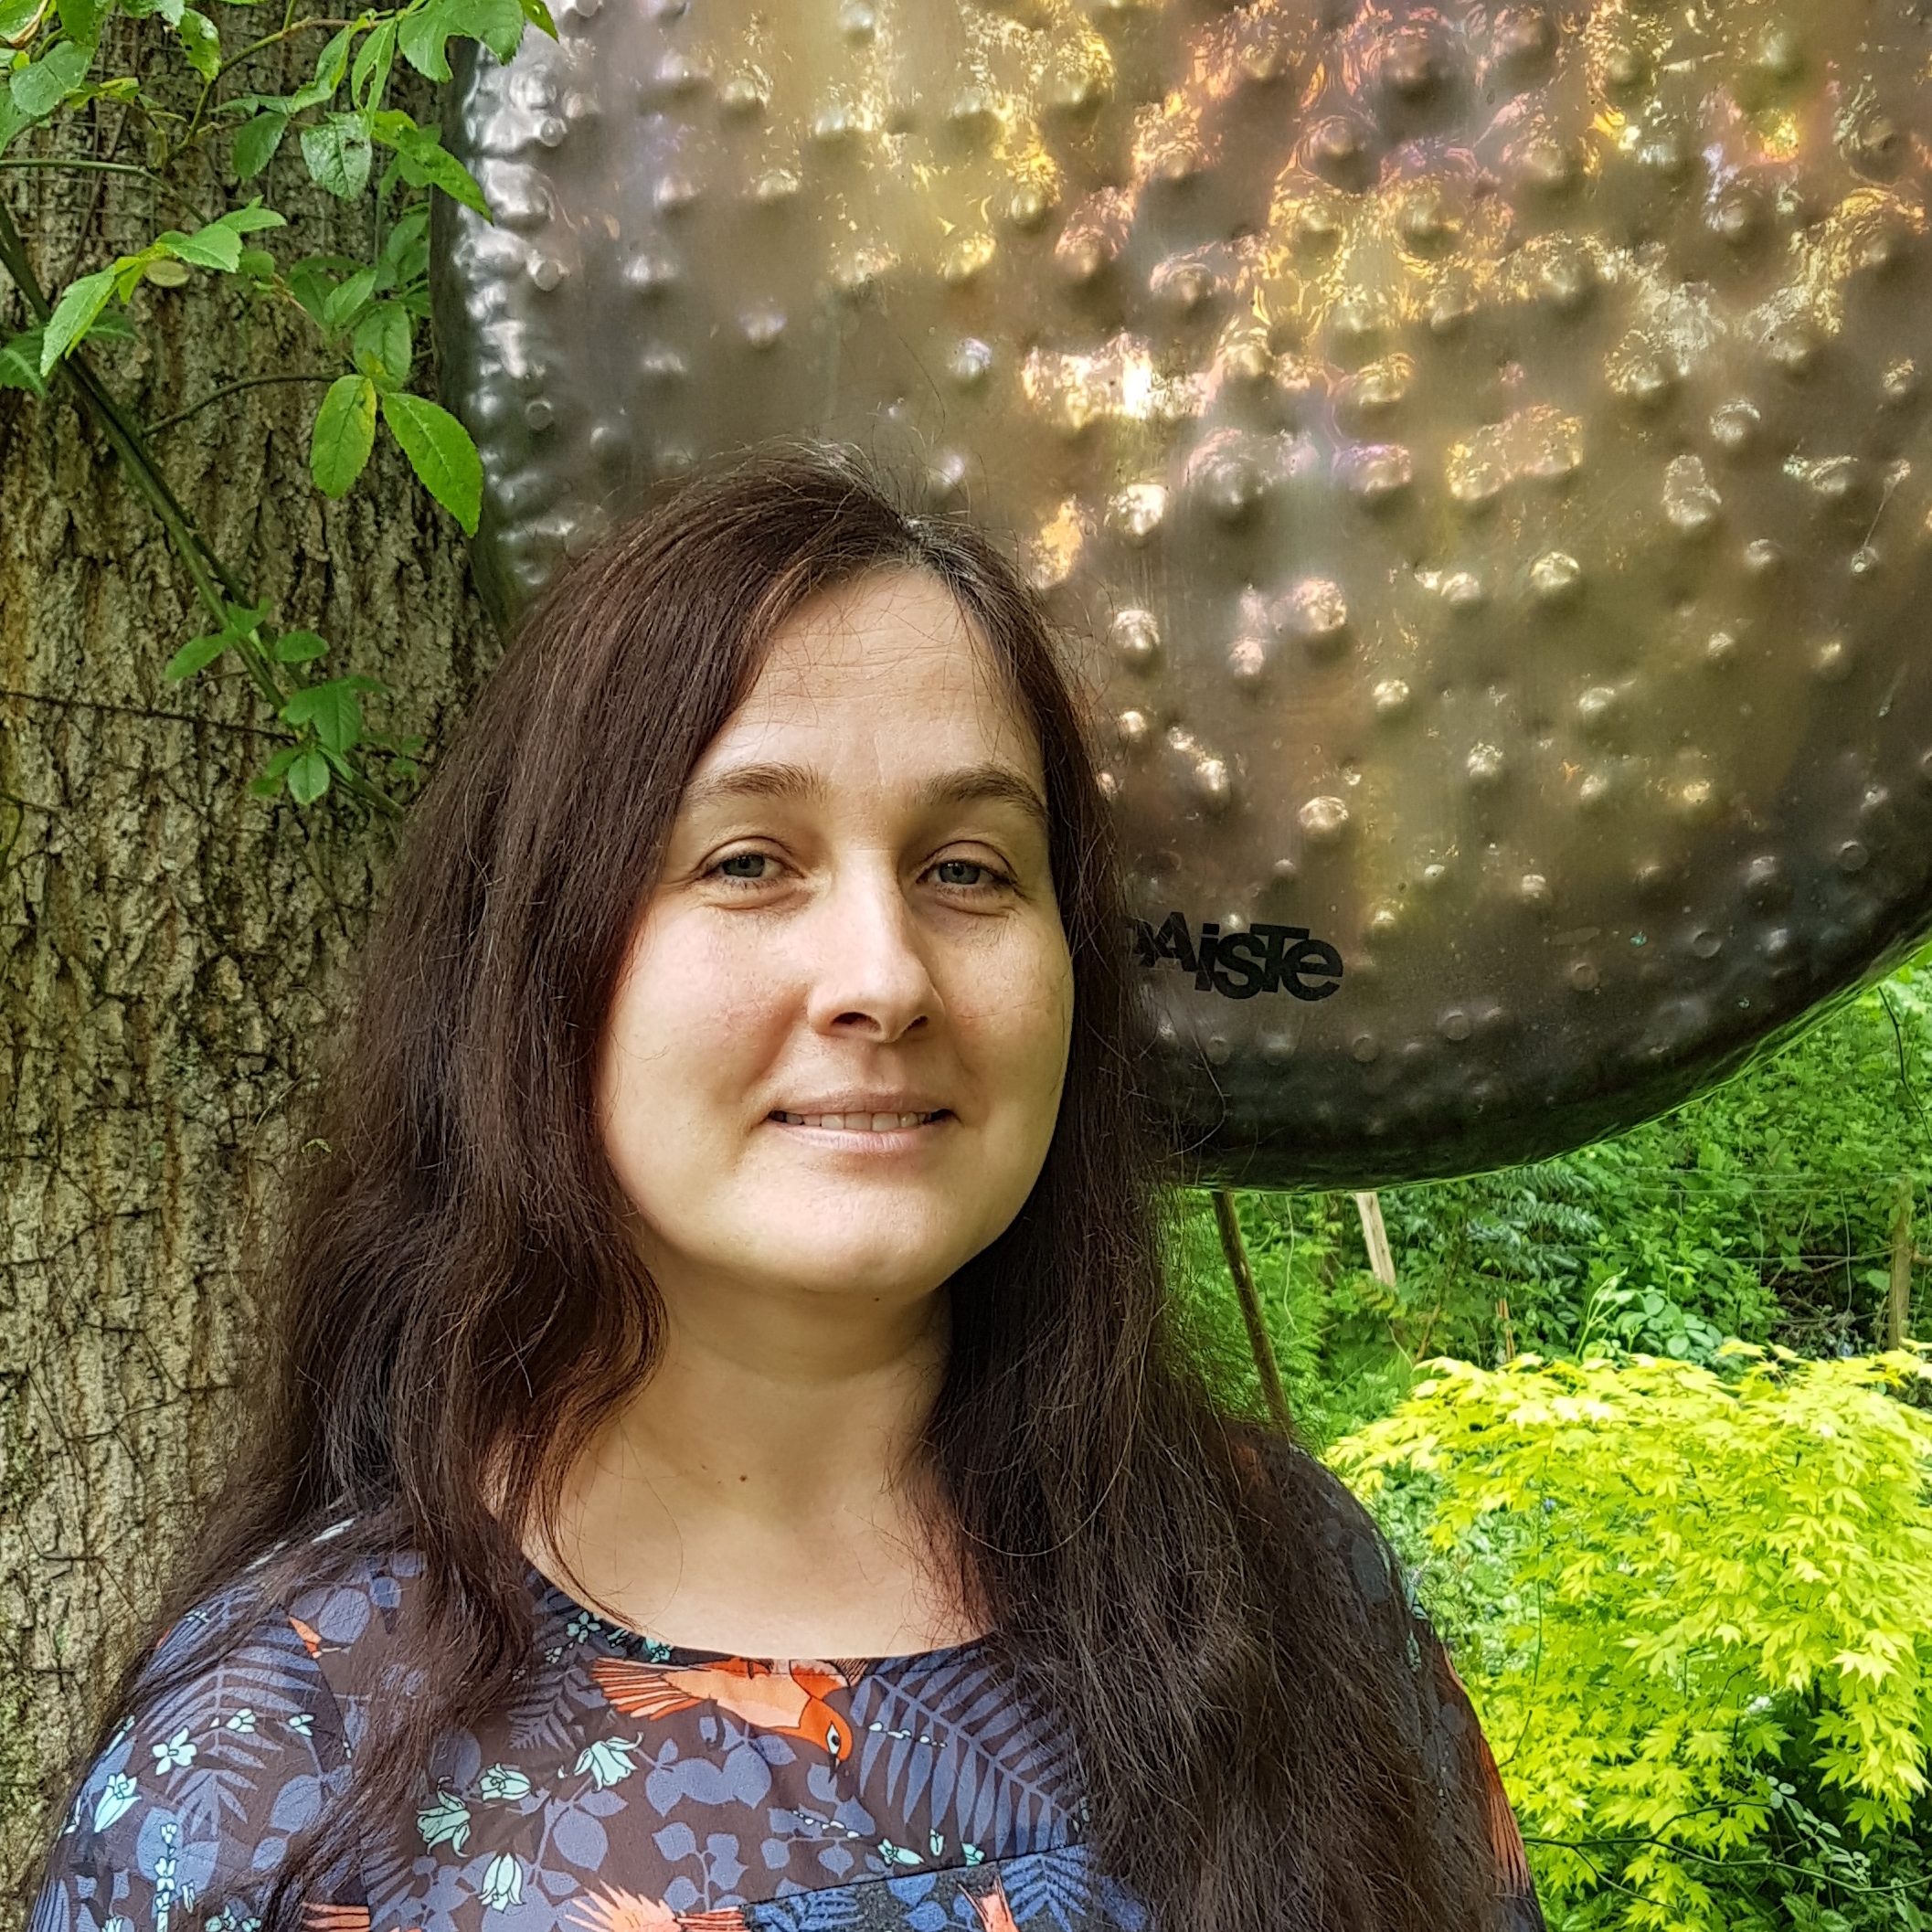 Masha in garden with Earth gong May 2019